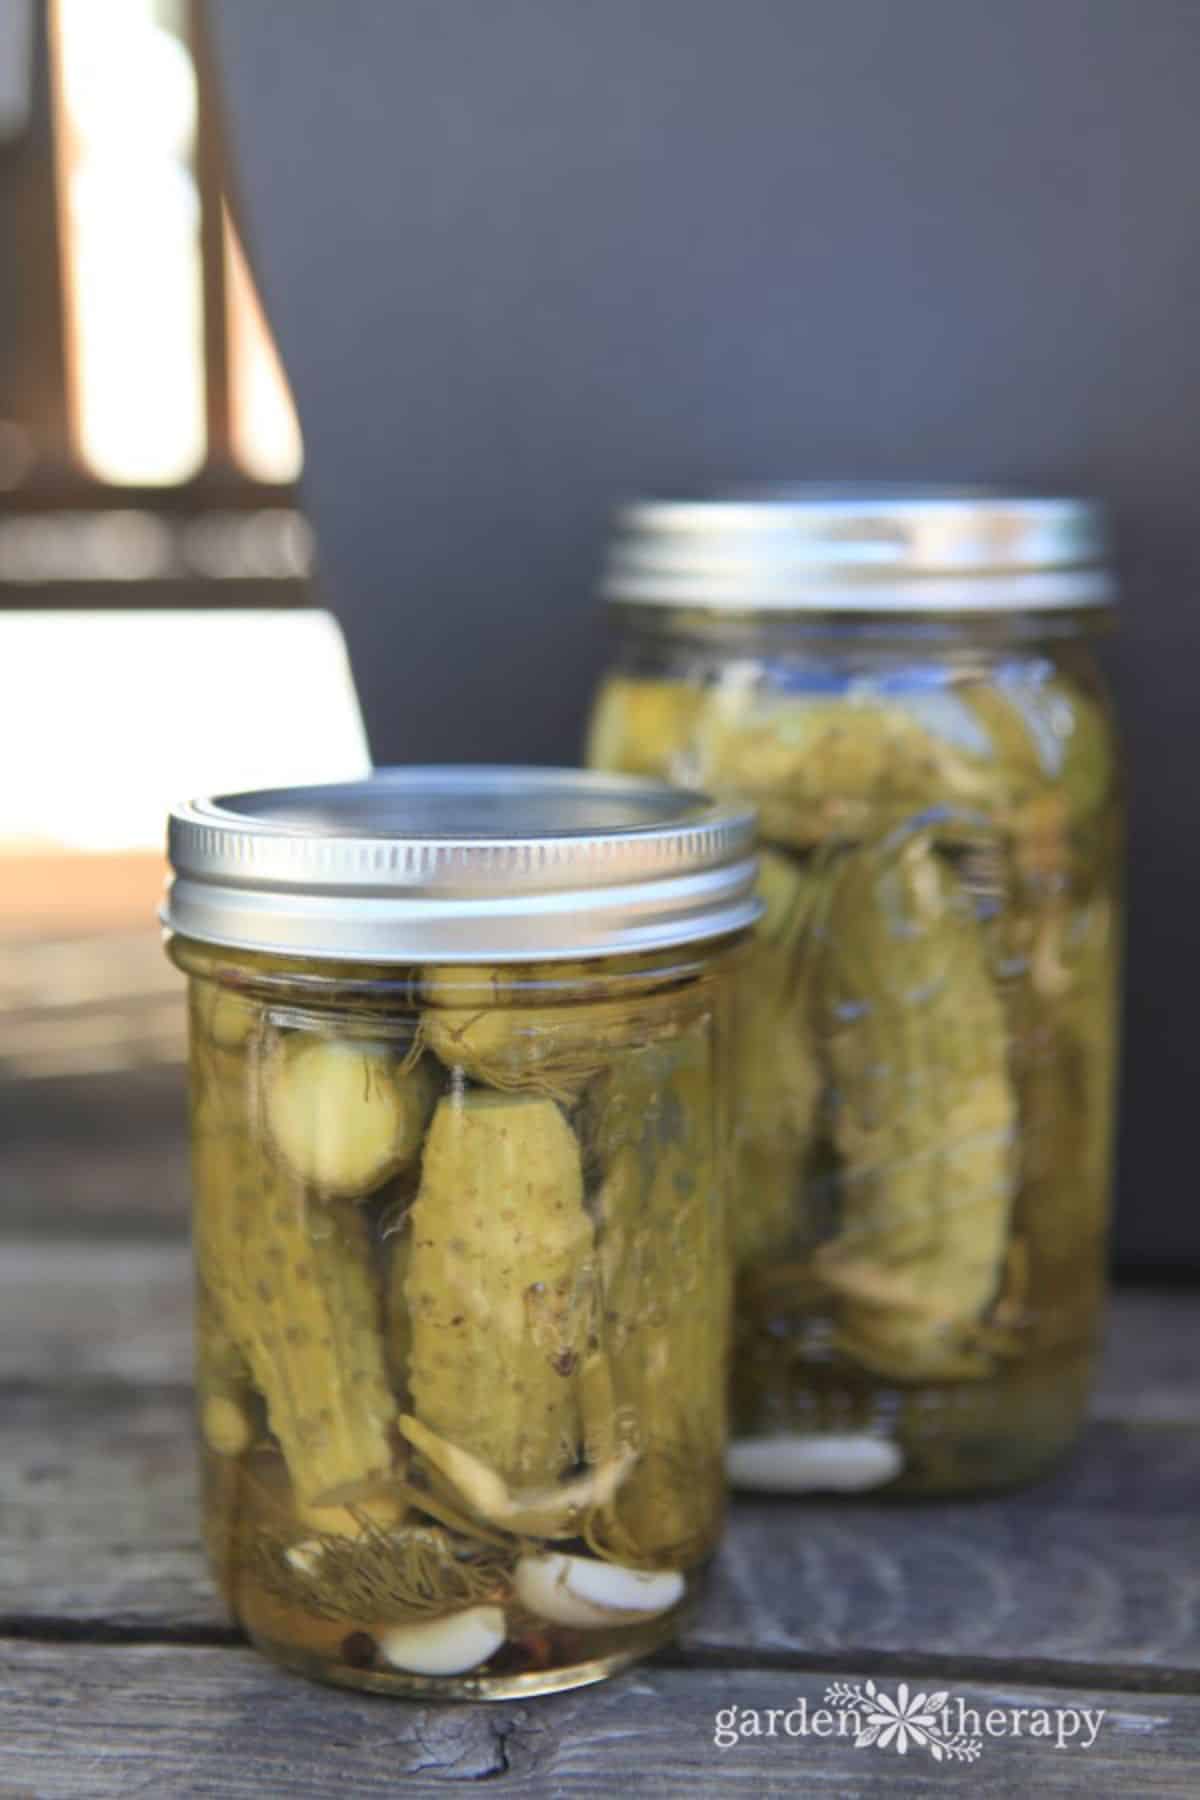 Delicious sour pickles in two glass jars.